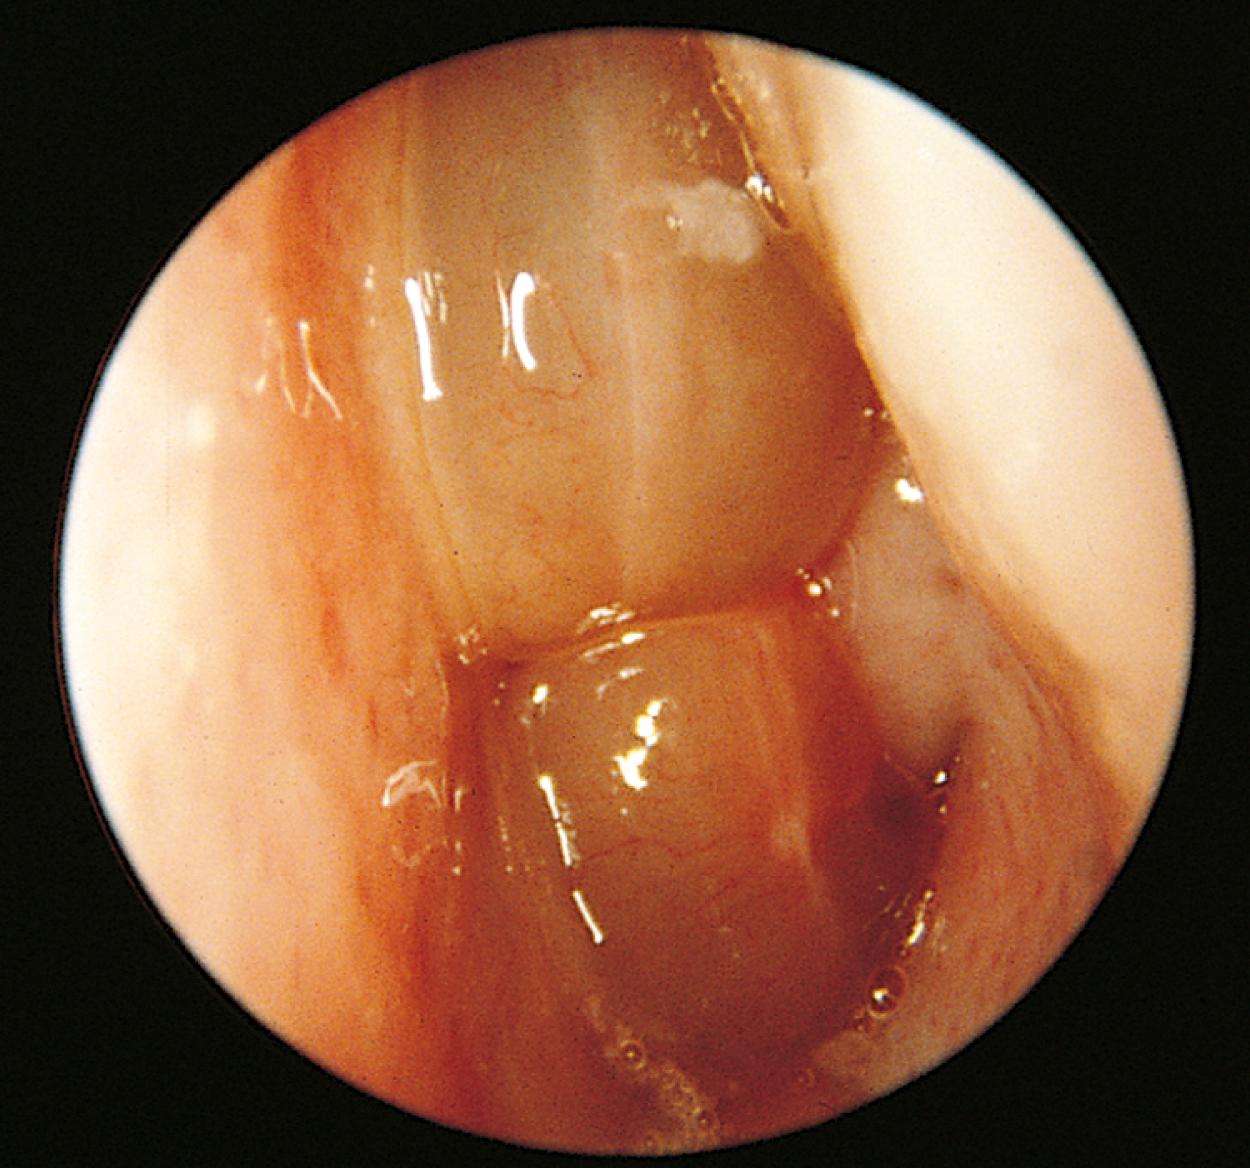 Fig. 24.42, Nasal polyp. This 2-year-old girl with cystic fibrosis was referred because of nasal obstruction and nocturnal snoring of a few months’ duration. A large grayish polyp was found in the left nostril. Any child presenting with a nasal polyp should be tested for cystic fibrosis.